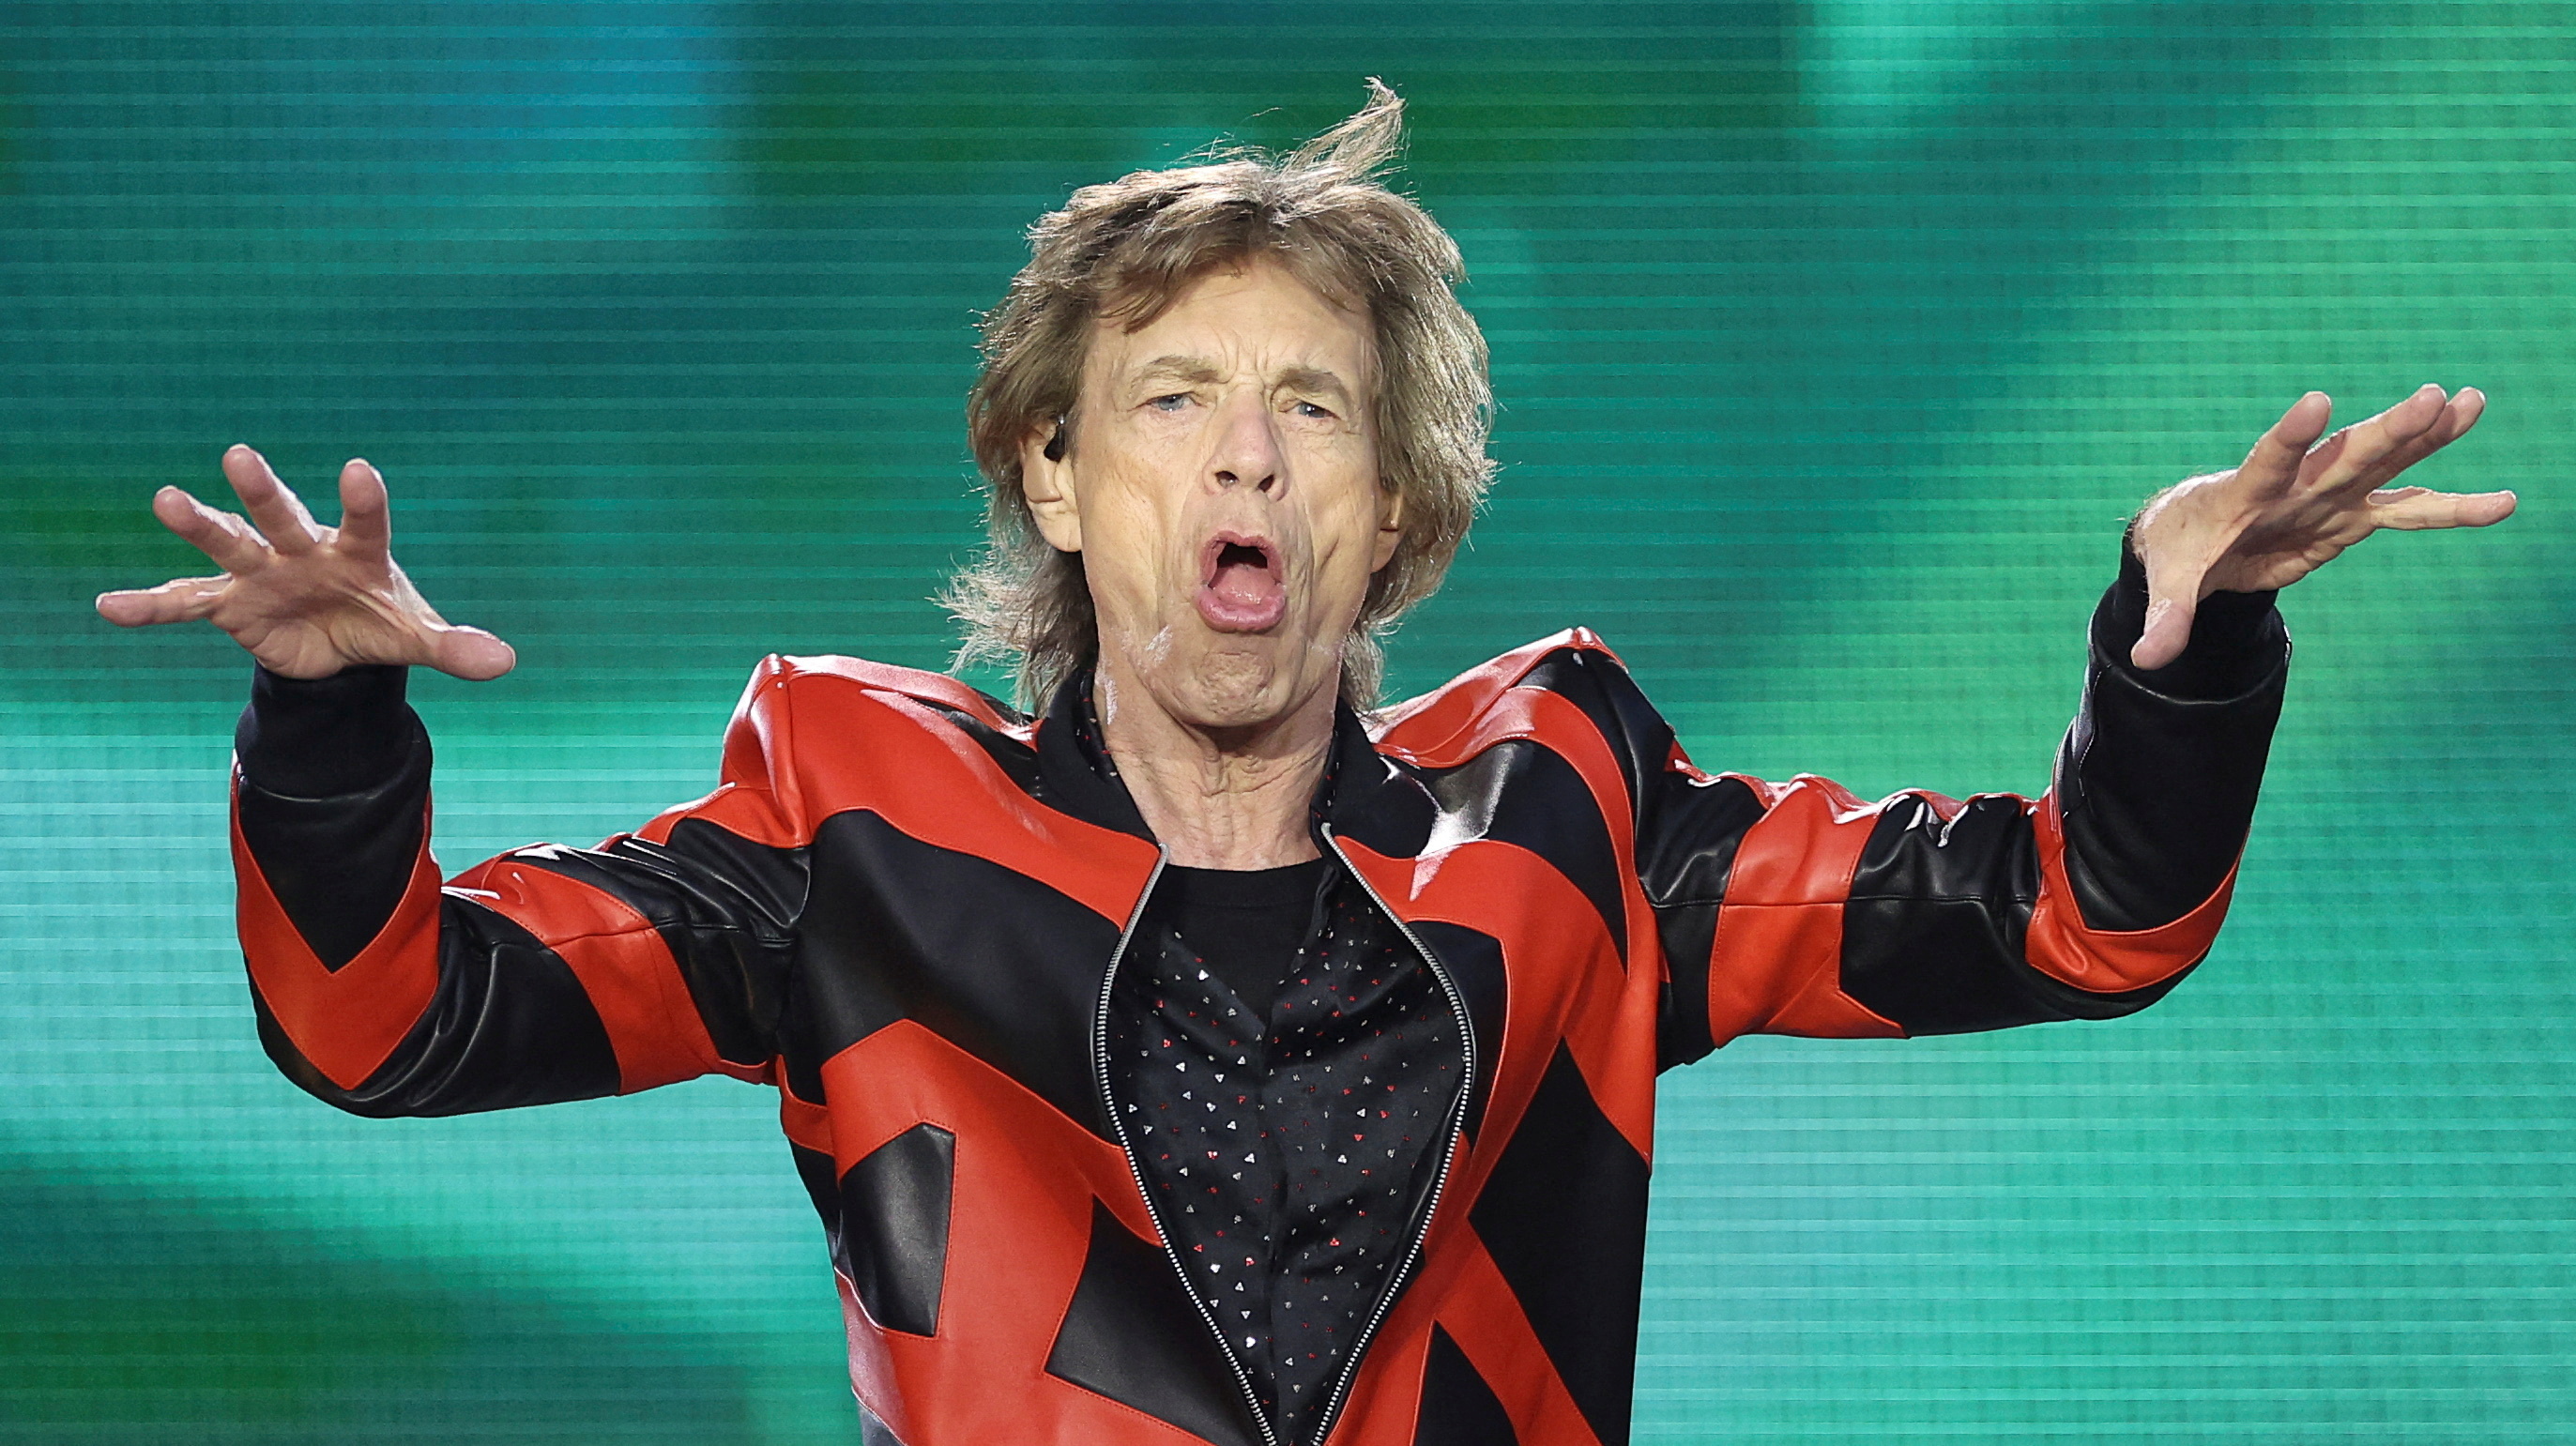 Mick Jagger quarantines show second Rolling scrapped Stones COVID, with | Reuters